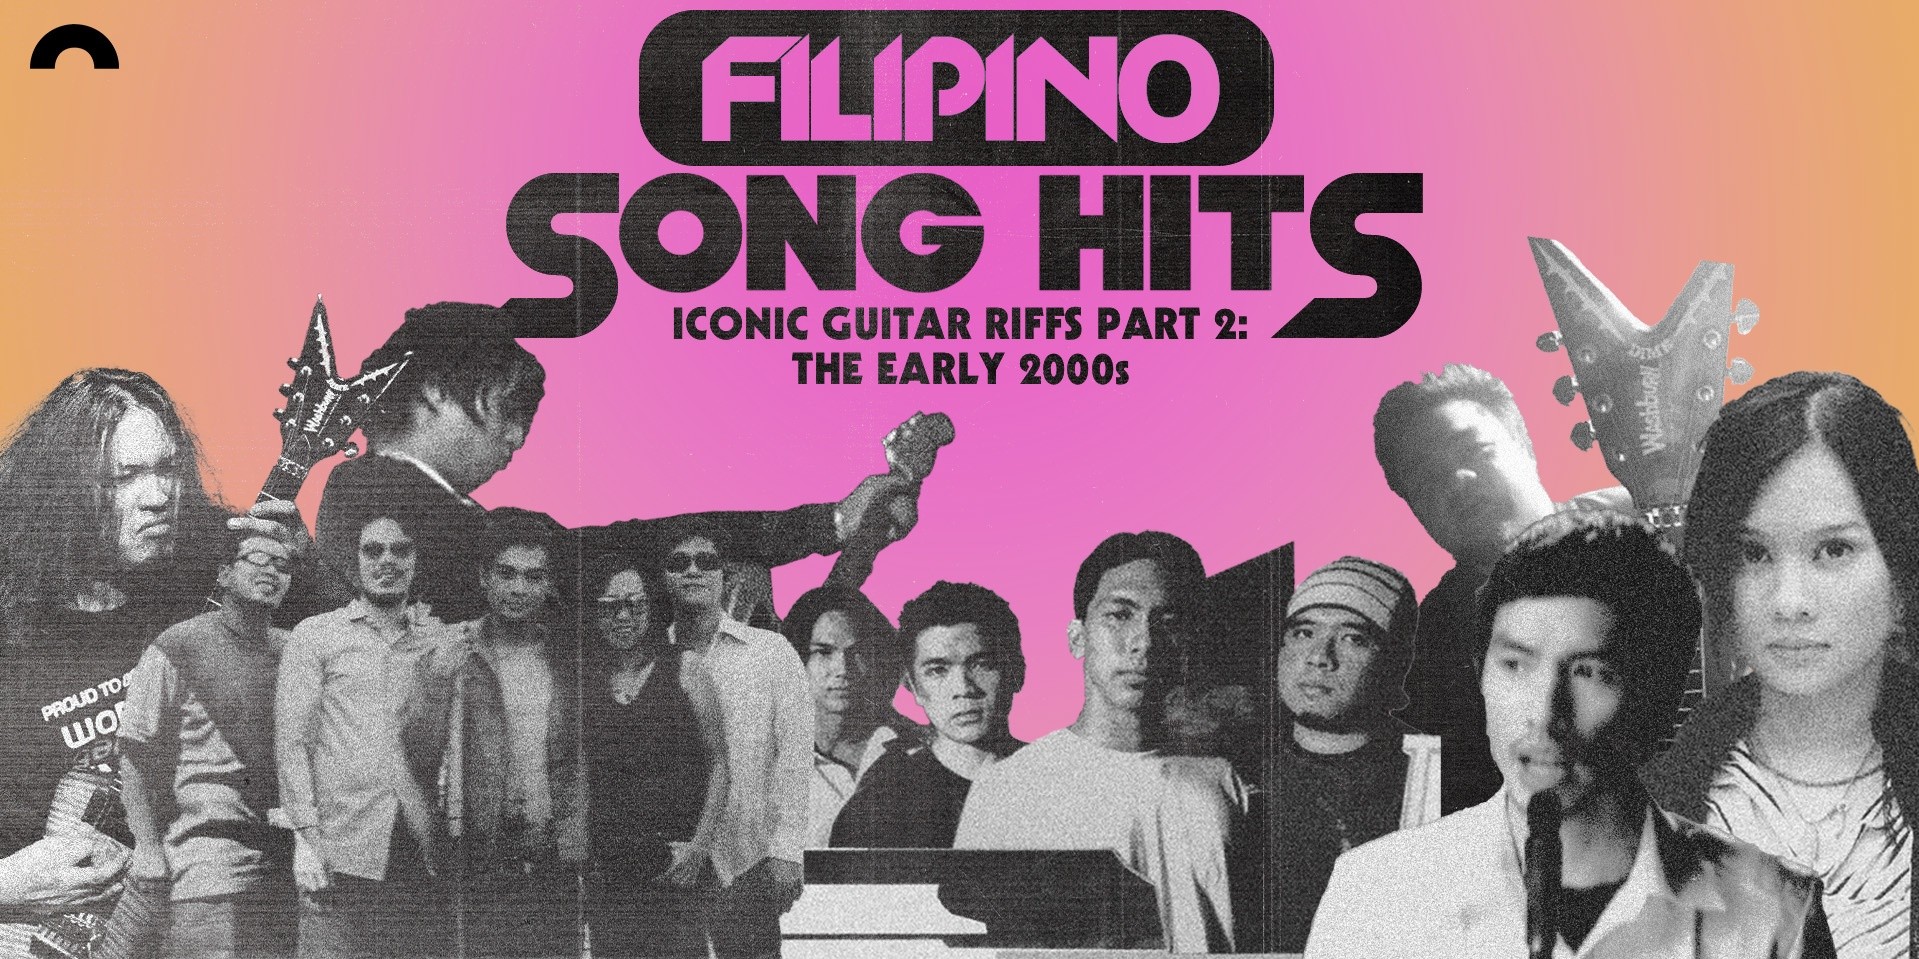 Filipino Song Hits: iconic guitar riffs part 2 – the early 2000s: Sandwich, Kjwan, Kitchie Nadal, Rico Blanco, Greyhoundz, and more